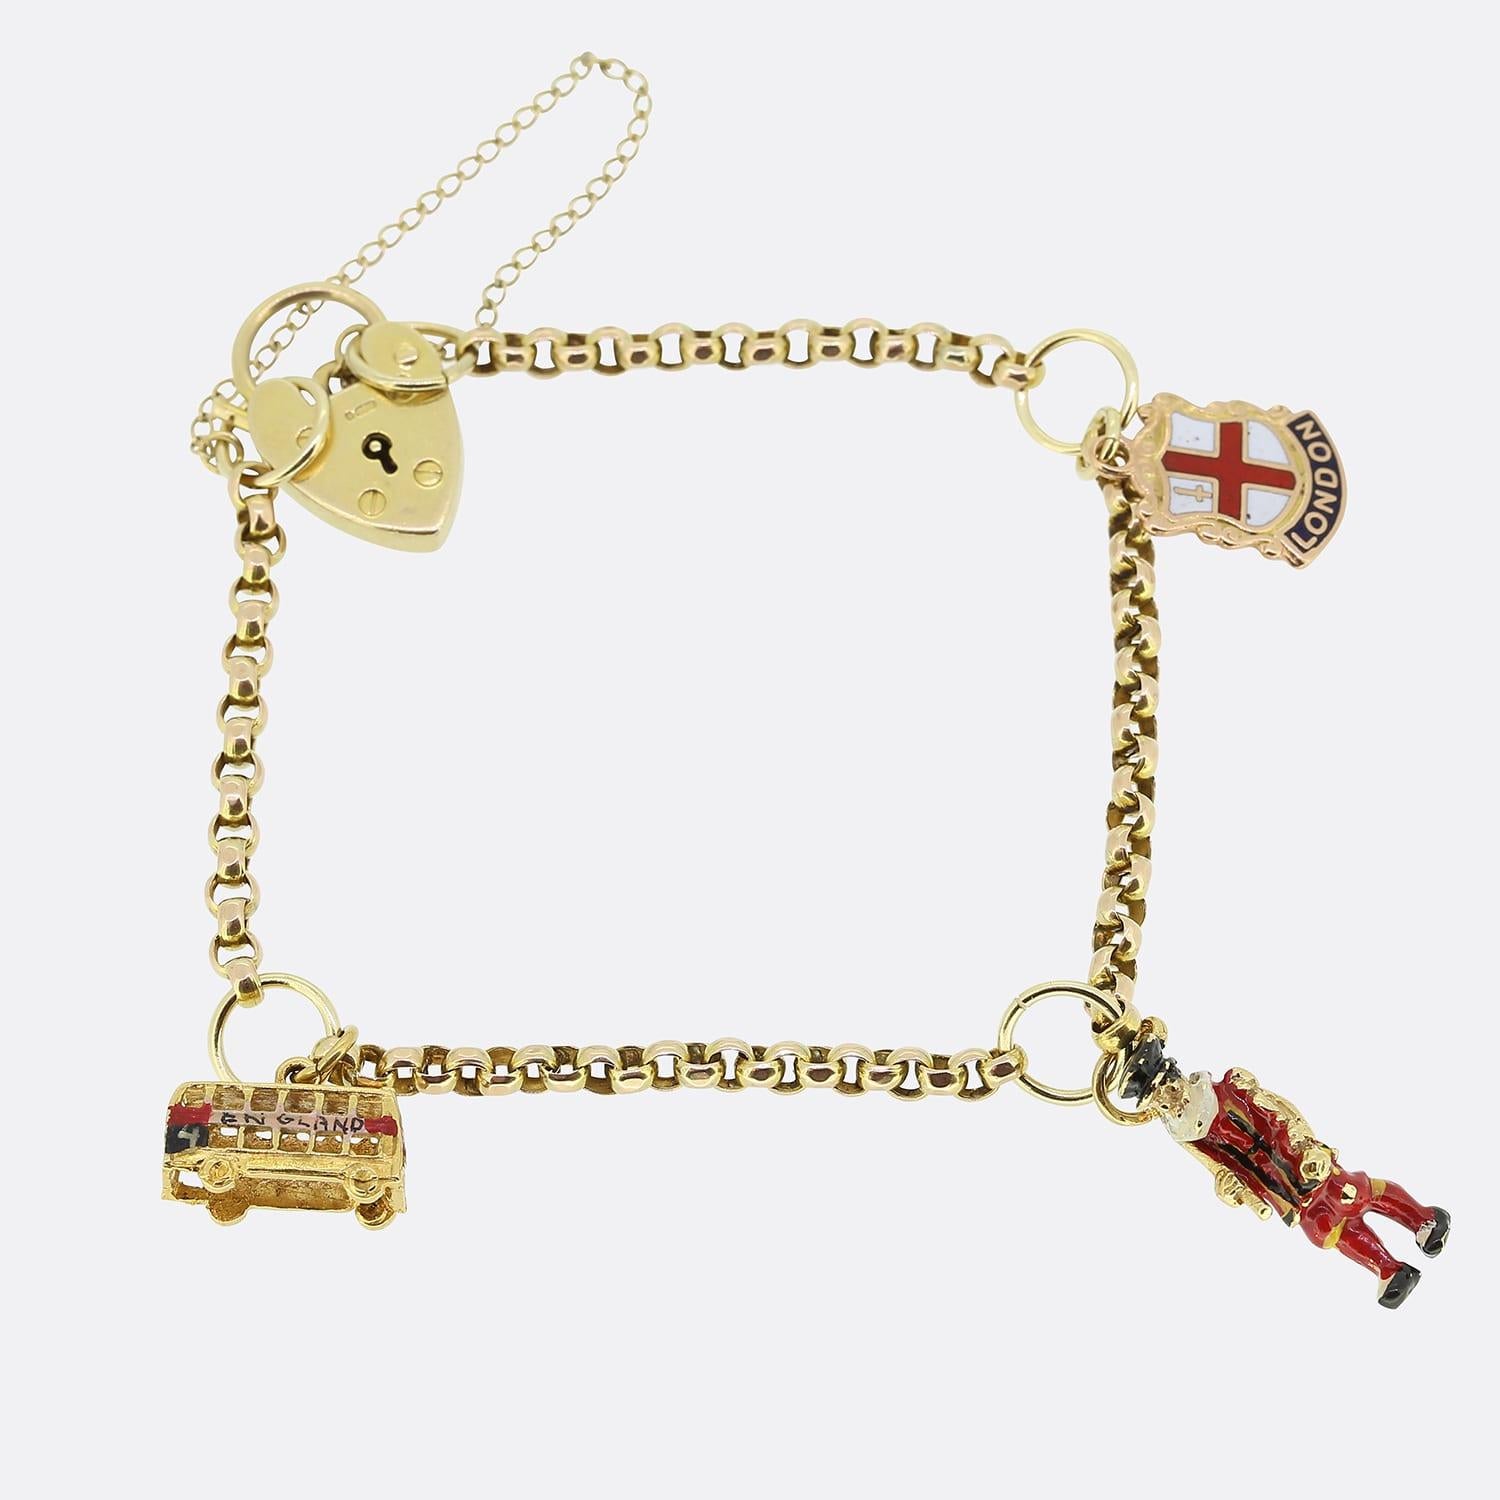 This is a vintage 9ct yellow gold belcher charm bracelet. The bracelet features three charms including an enamel bus, an enamel queens guard and an enamel United Kingdom flag charm. The chain is secured with an antique heart padlock clasp.